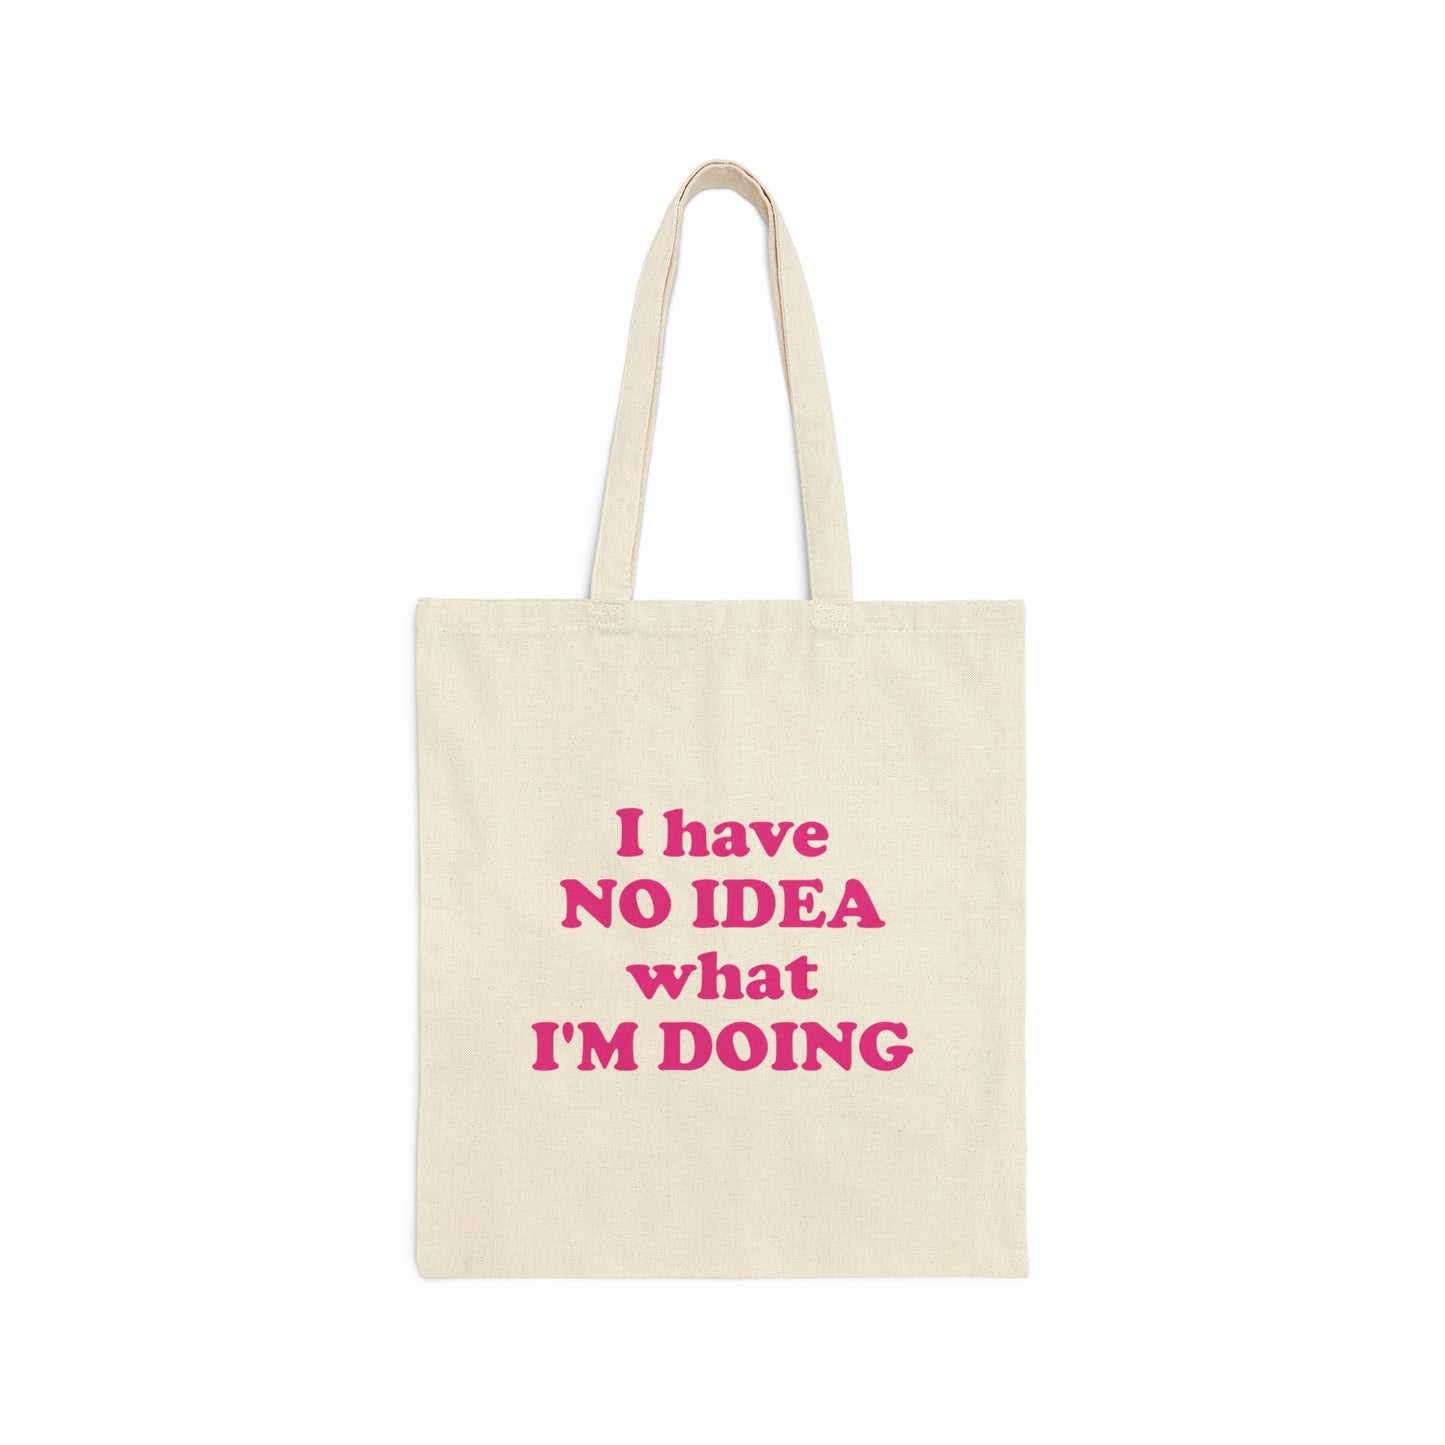 I Have No Idea What I'm Doing Funny Educational Quotes Canvas Shopping Cotton Tote Bag